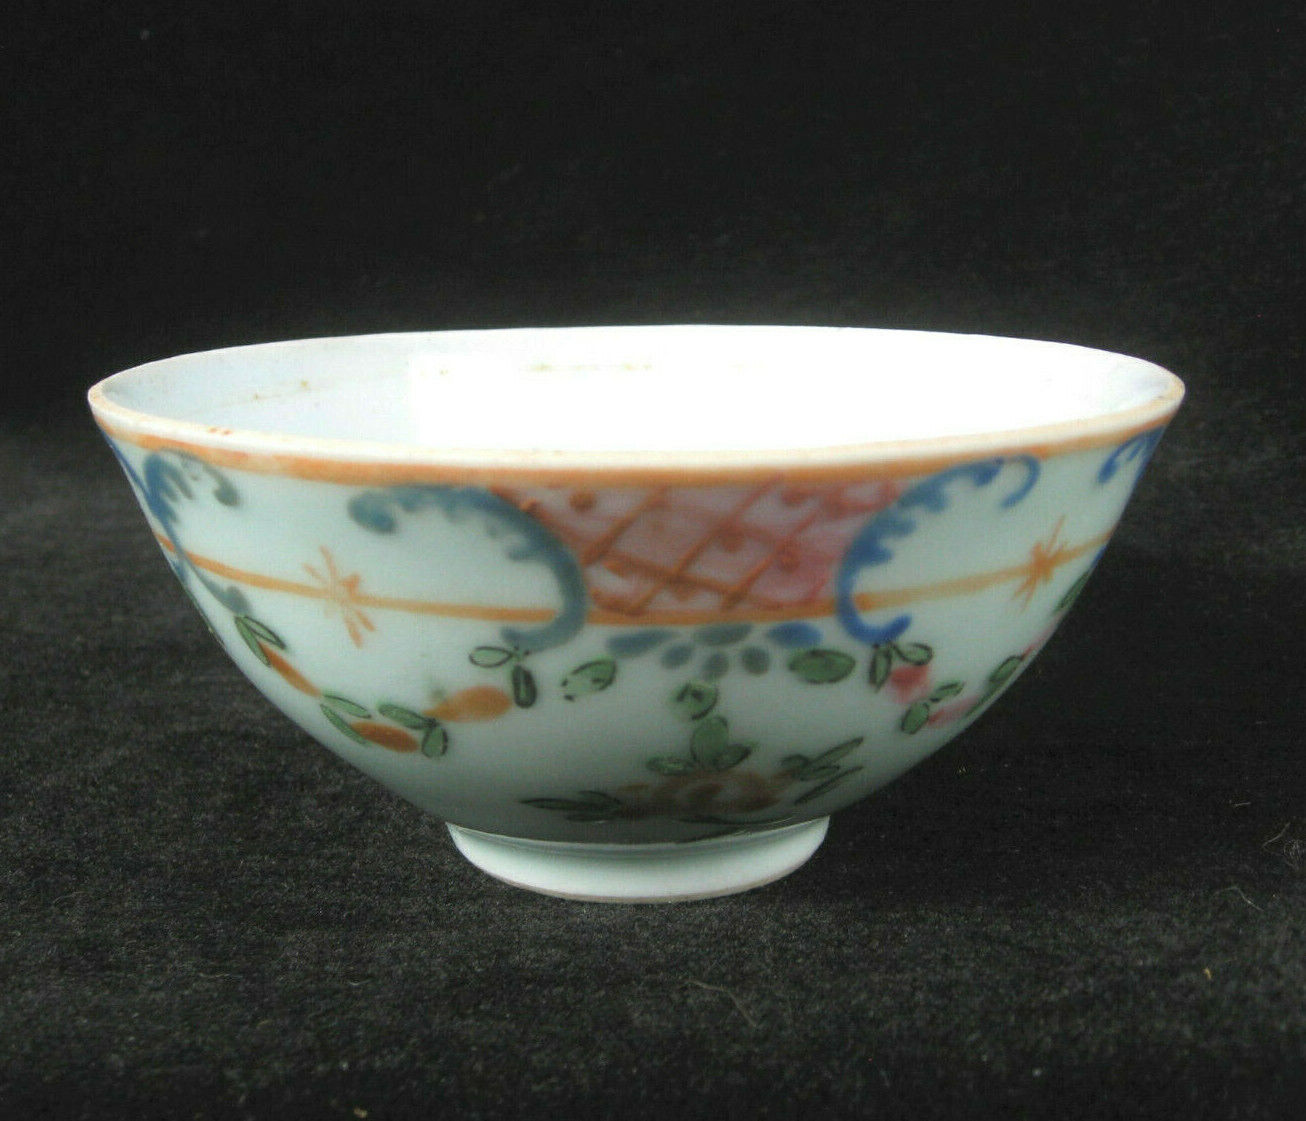 Late 19thc. Chinese Celadon Hand-Painted Small Bowl - 1860-1880